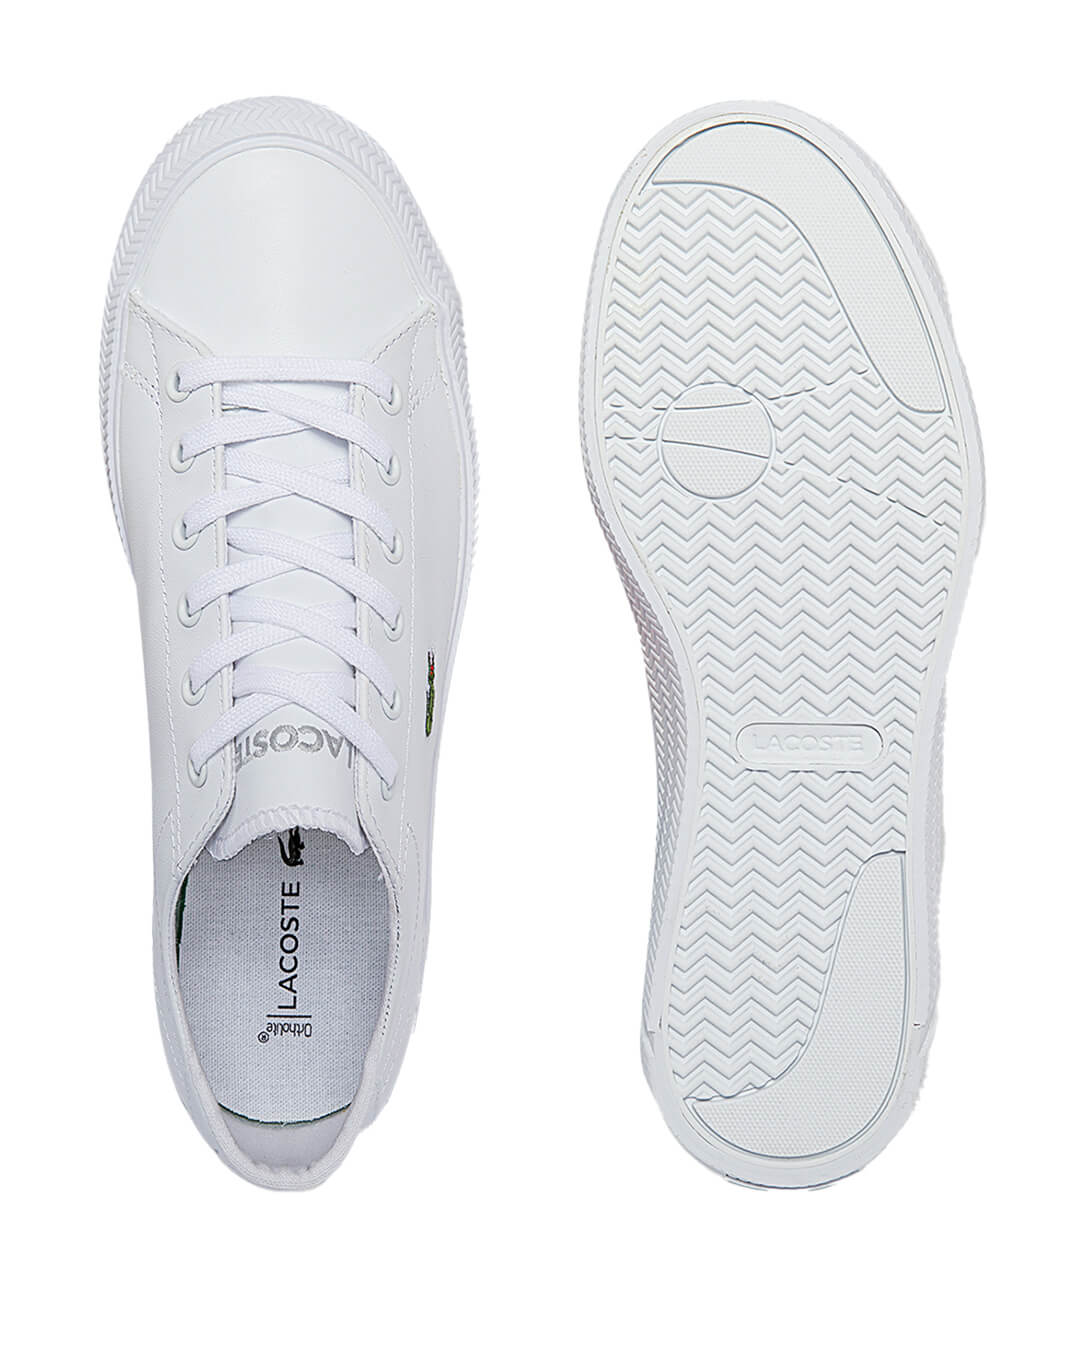 Lacoste Shoes Lacoste Gripshot Leather White Sneakers